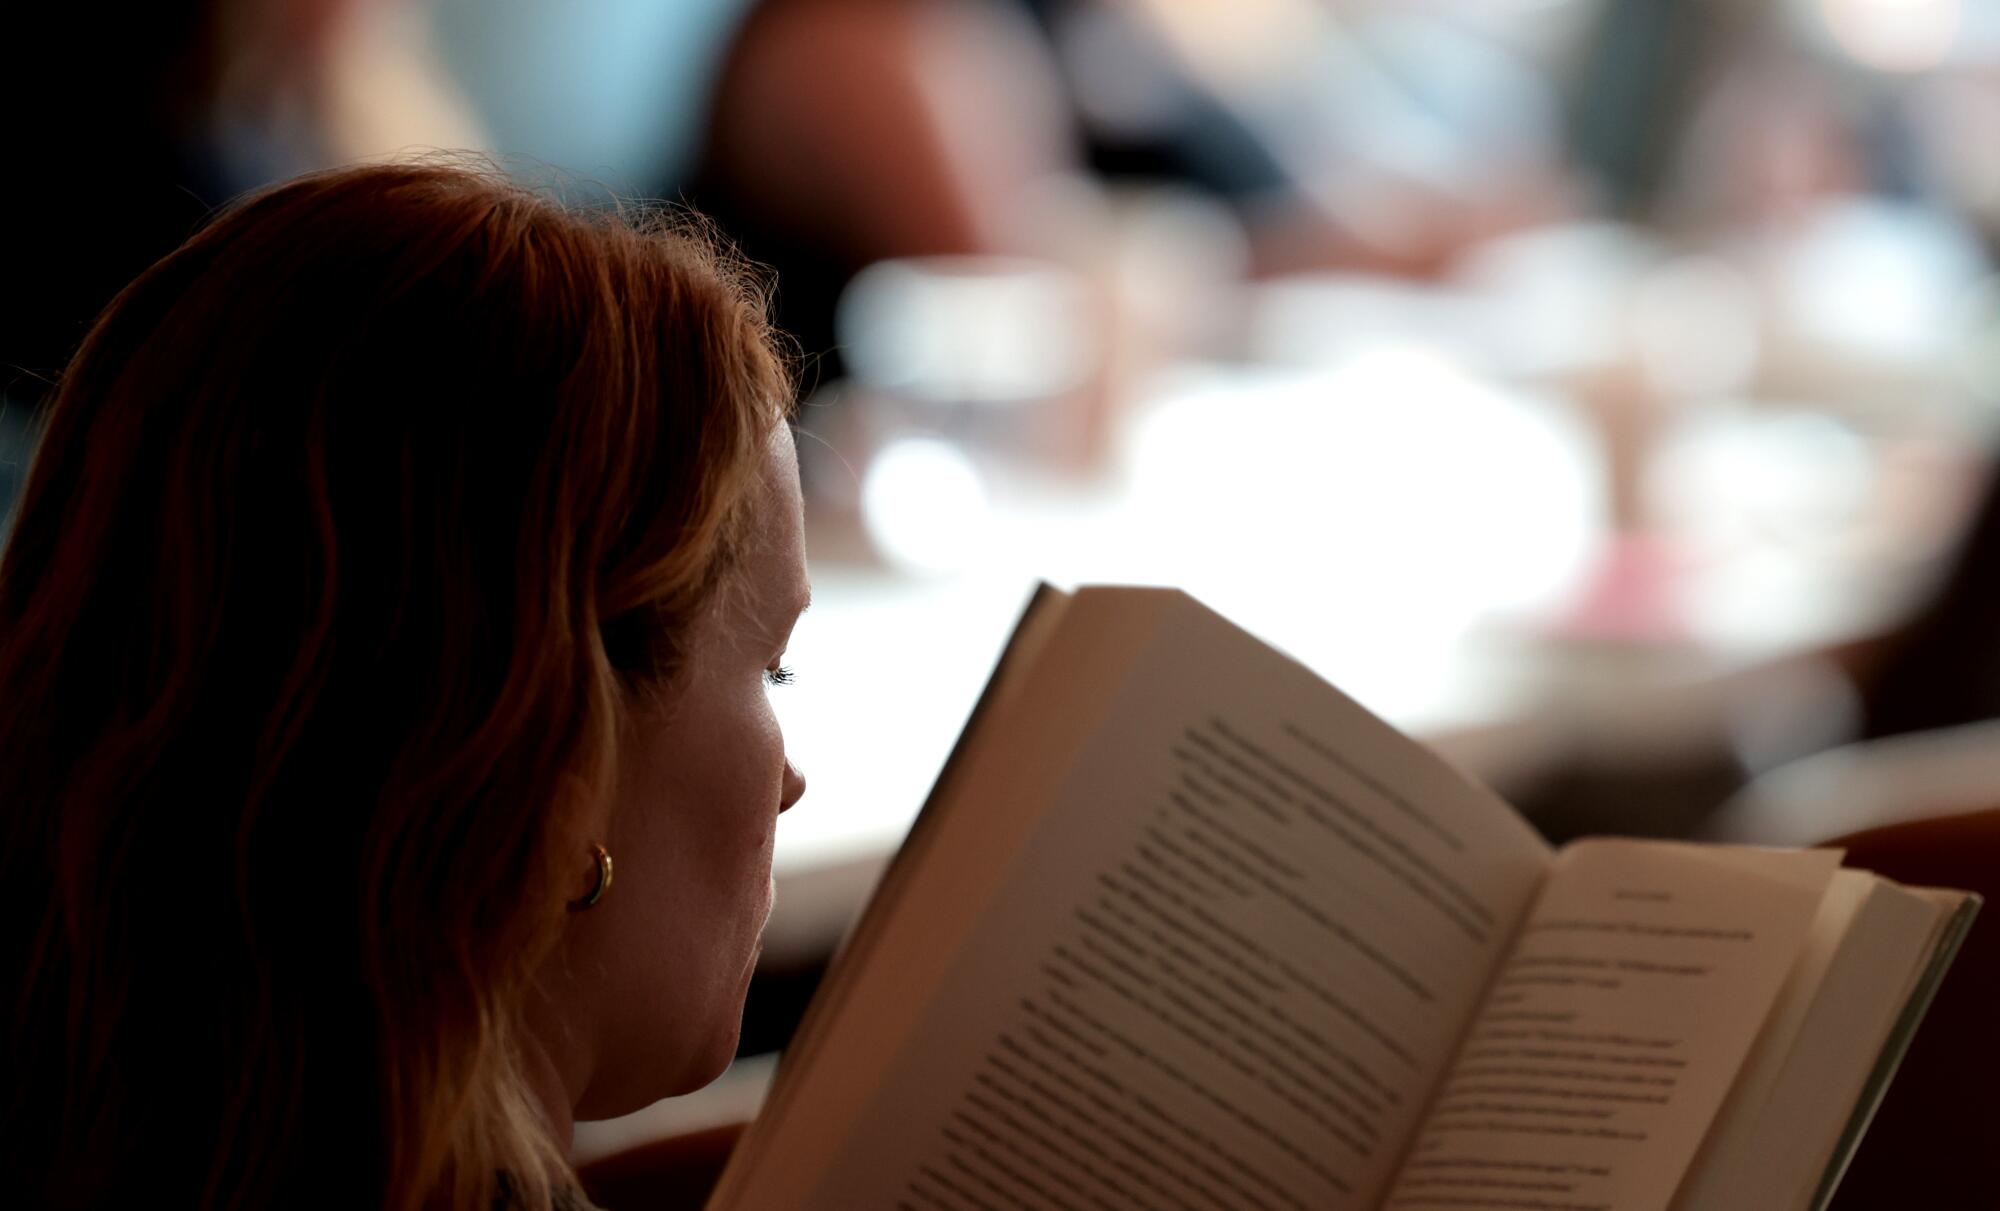 A woman reads a book. In the background, lights are pleasantly out of focus. 